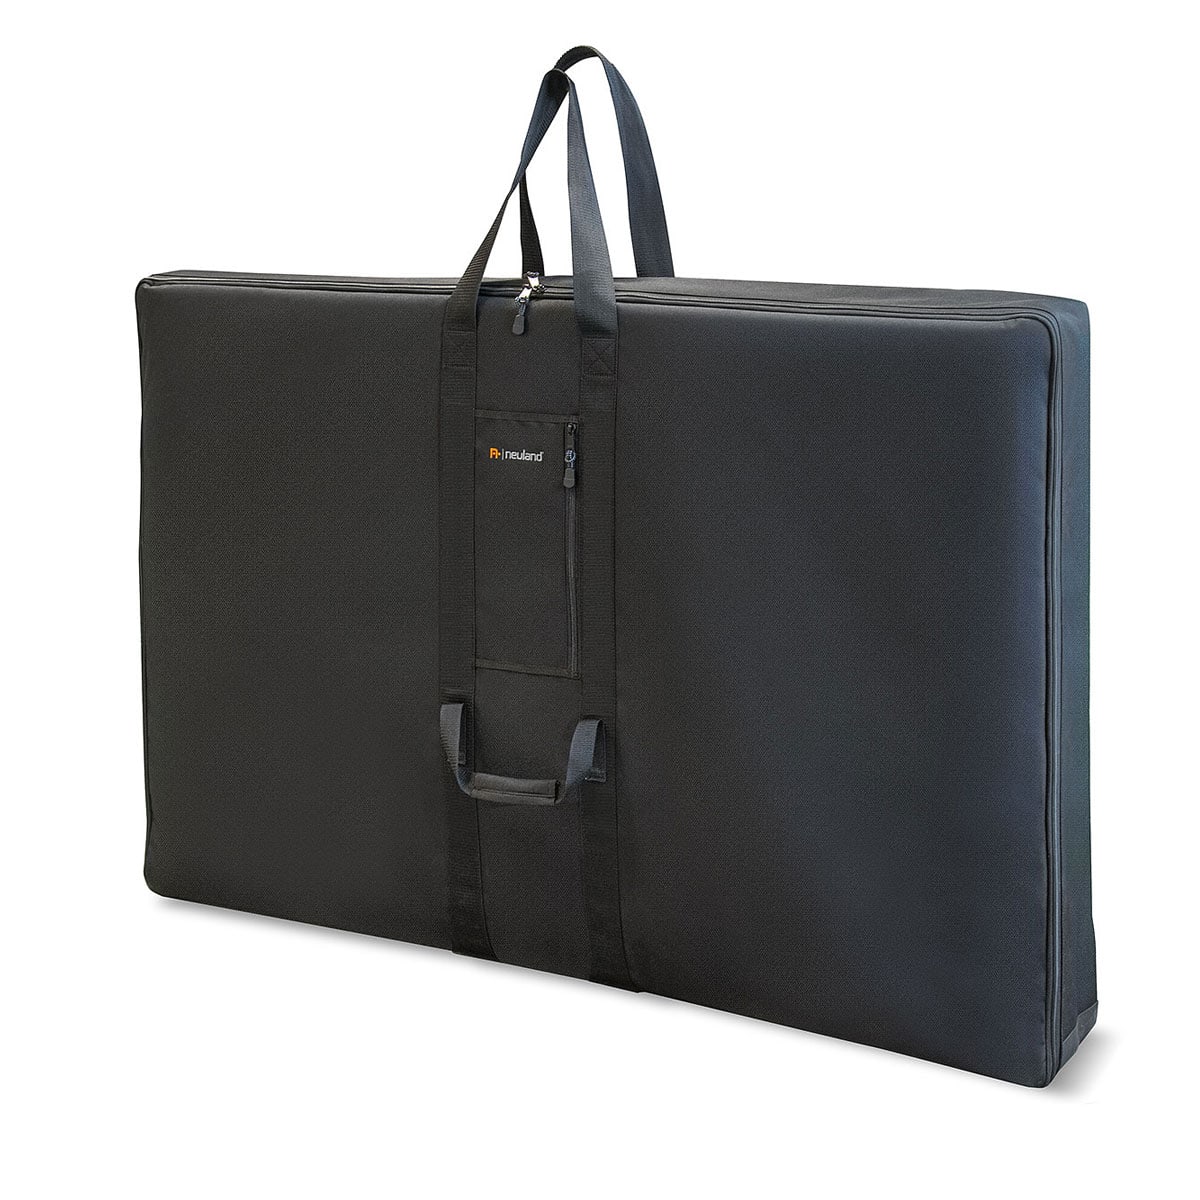 Carrying bag for GraphicWalls